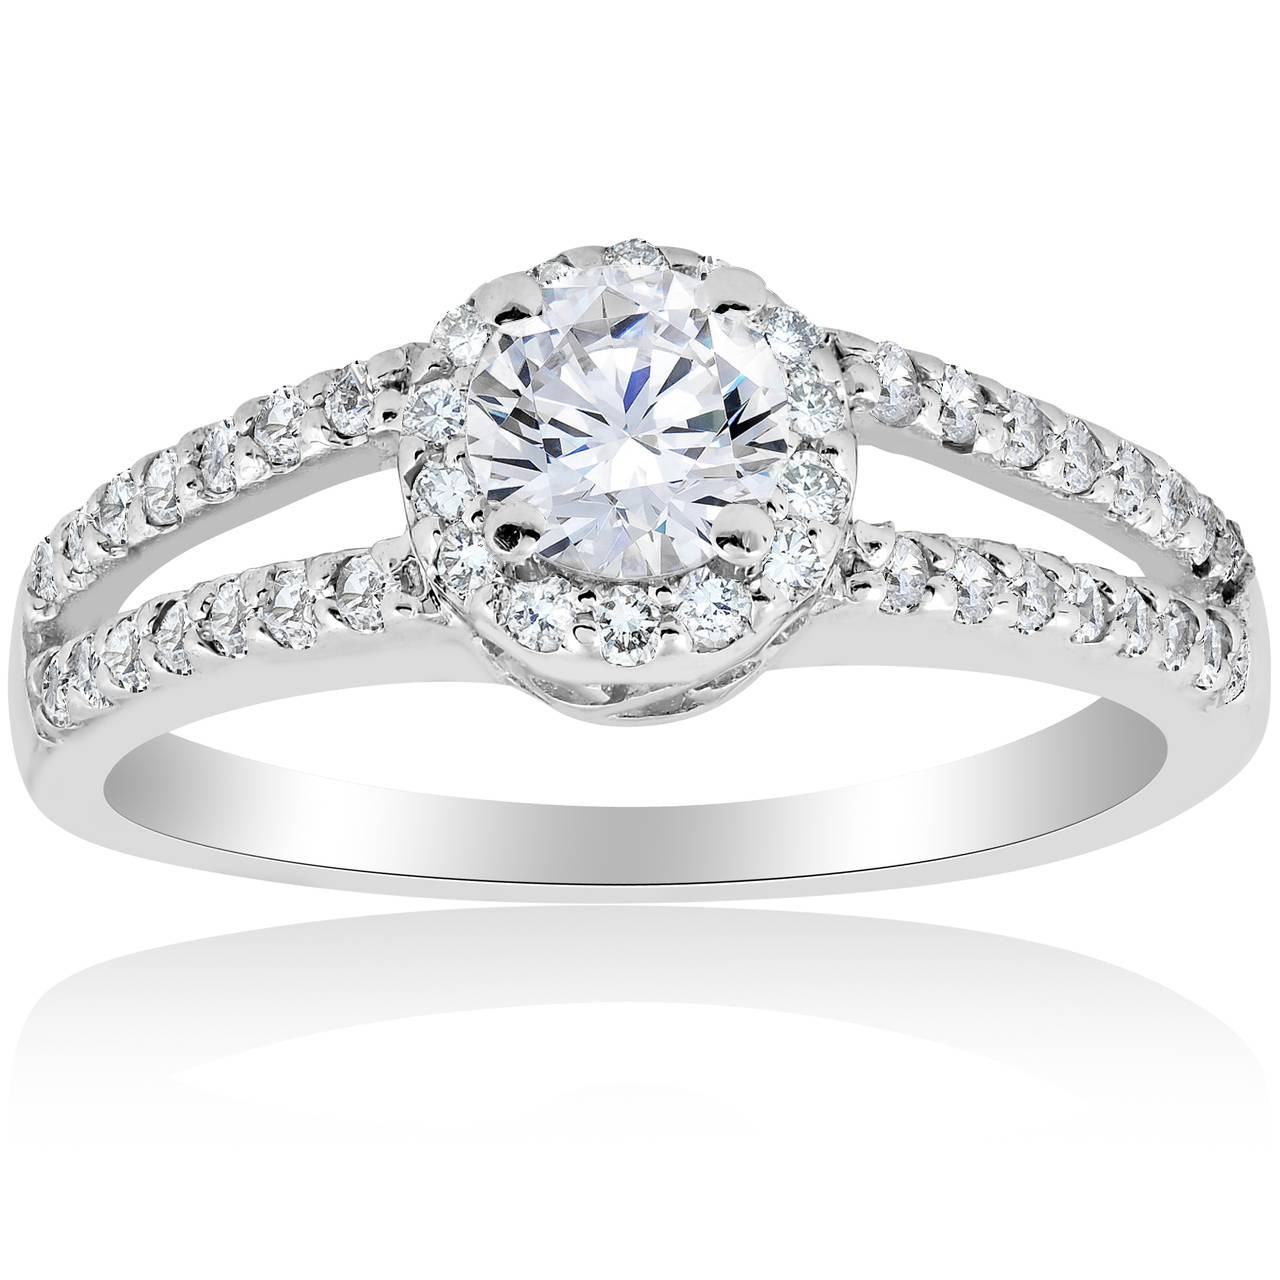 EXCELLENT CUT ROUND DIAMOND CLASSIC HALO ENGAGEMENT RING 14K WHITE GOLD  3/4ct